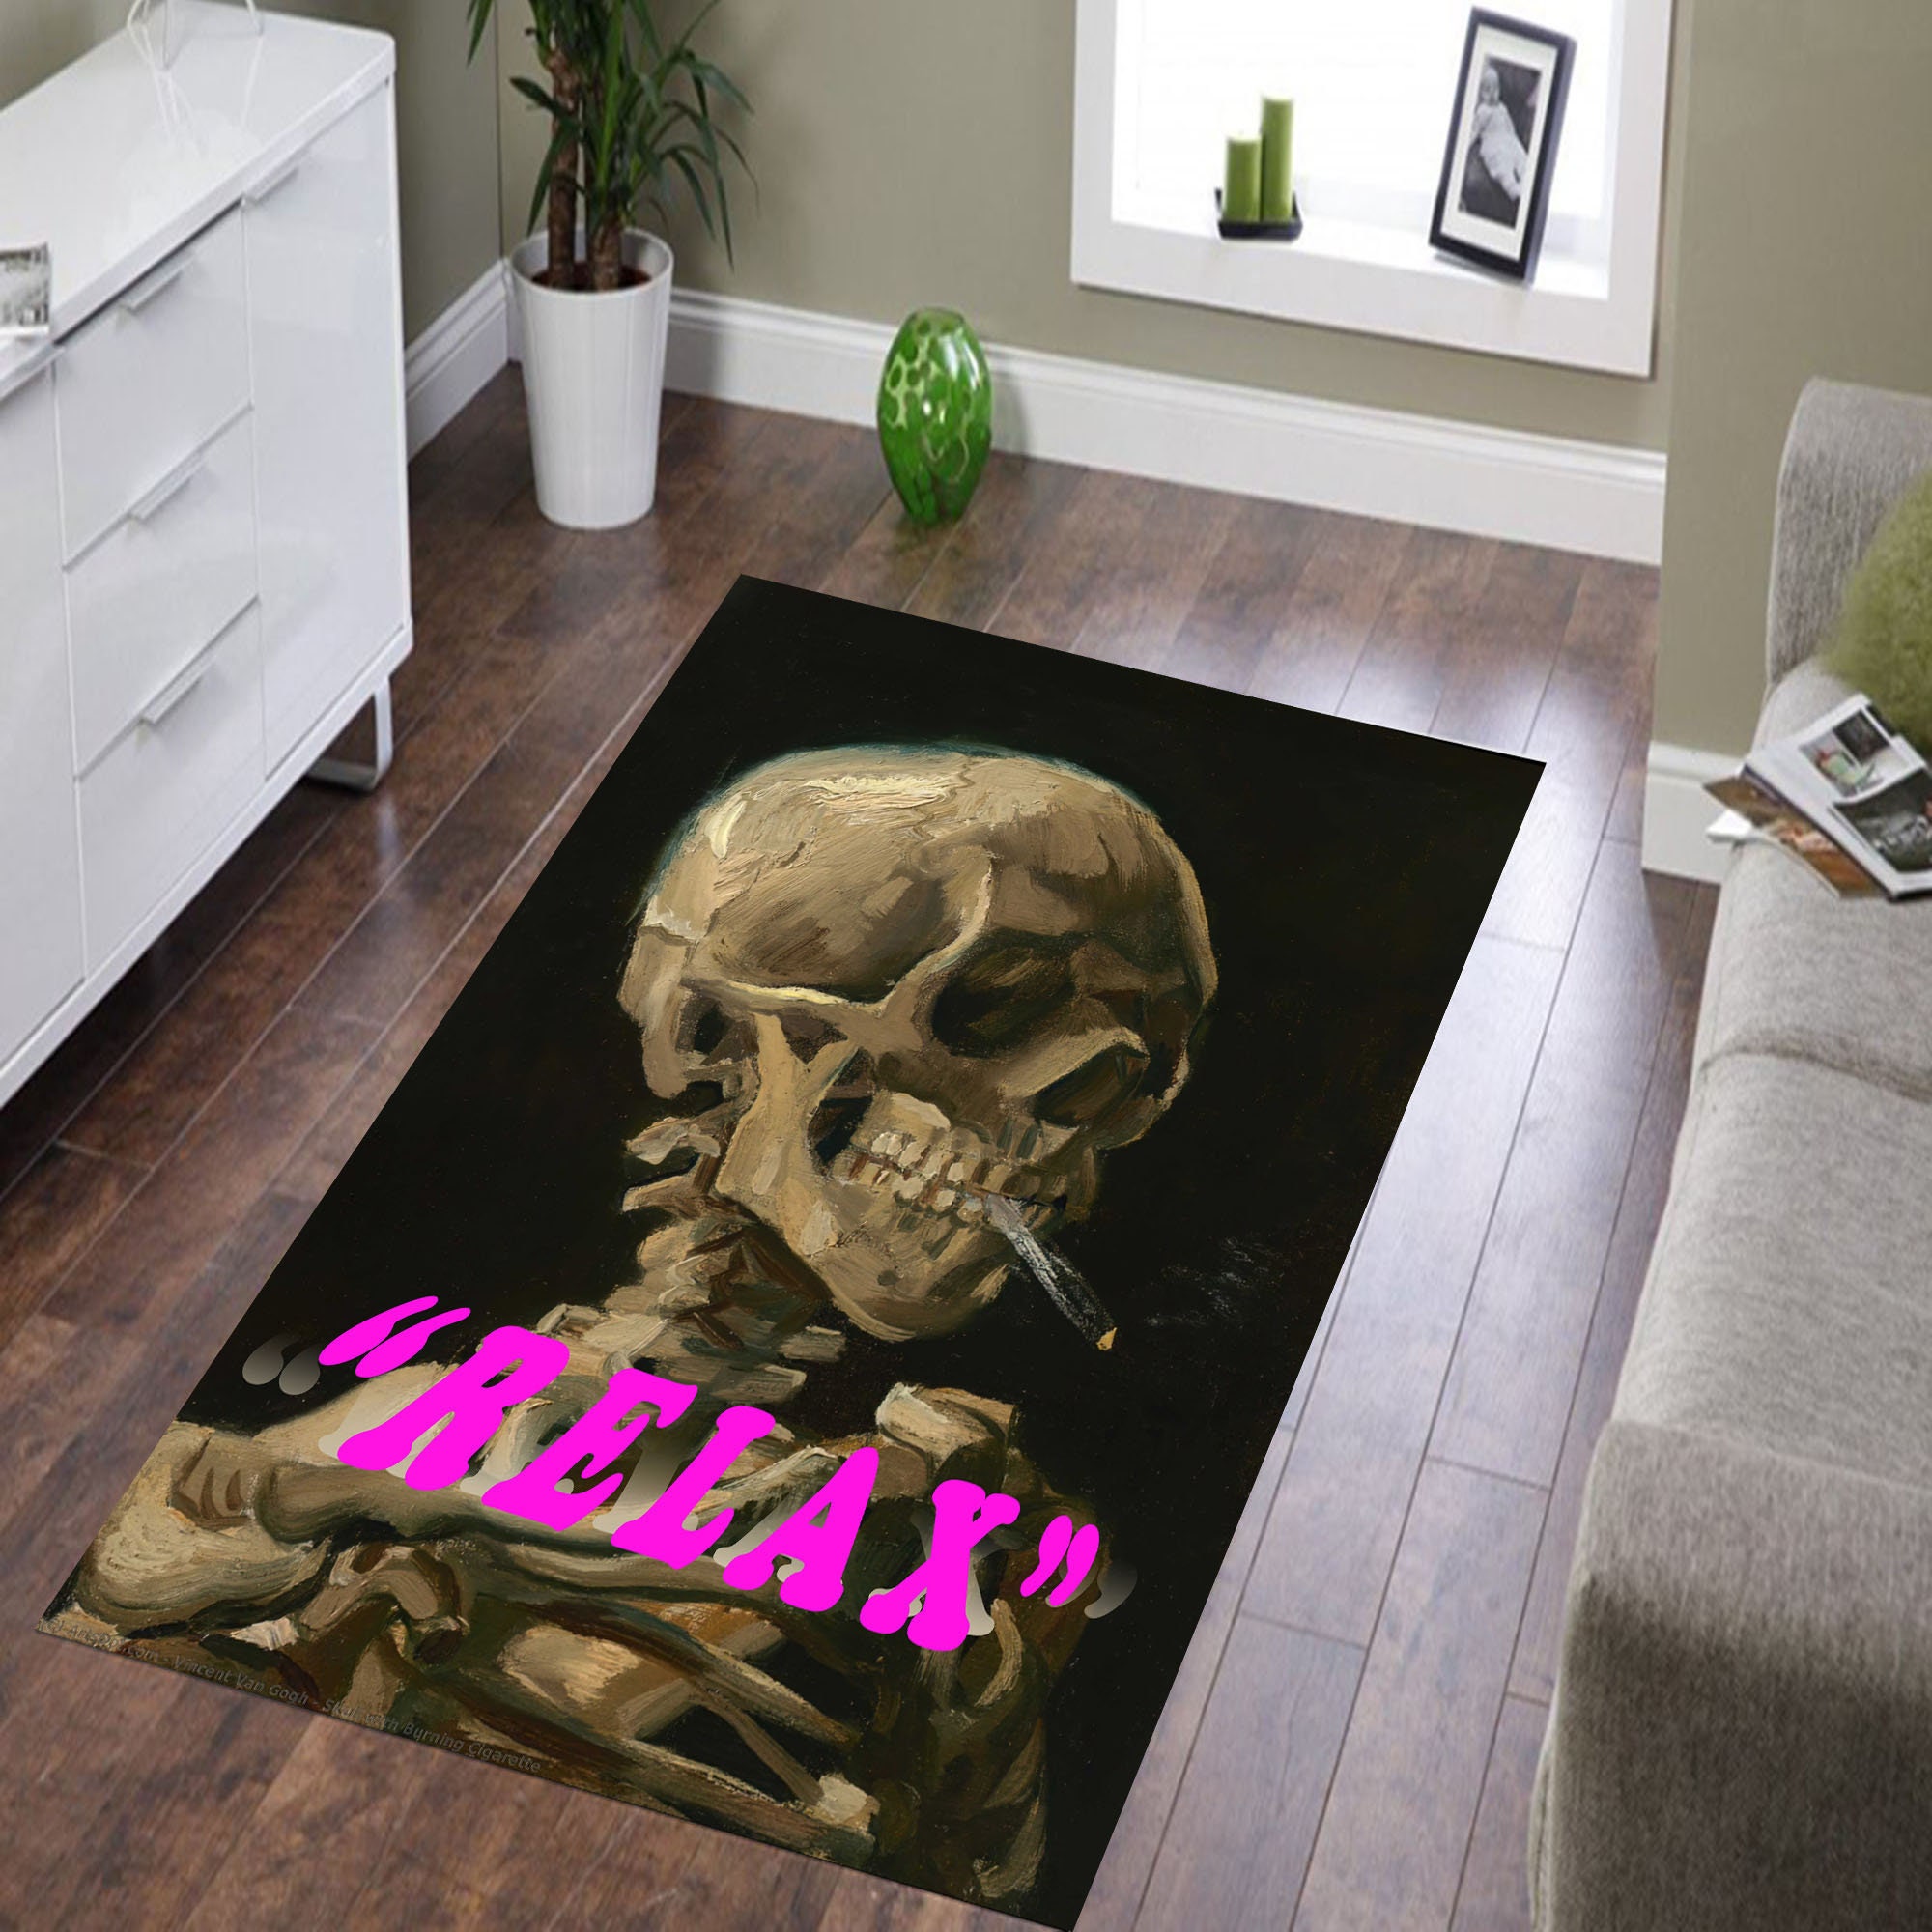 Discover Shady Relax Smoking Skull Rug,Funny Theme Rug,Funny Living Room Rug,Relax Skull Pattern Rug,Funny Kitchen Rug,Funny Pattern Bedroom Rug